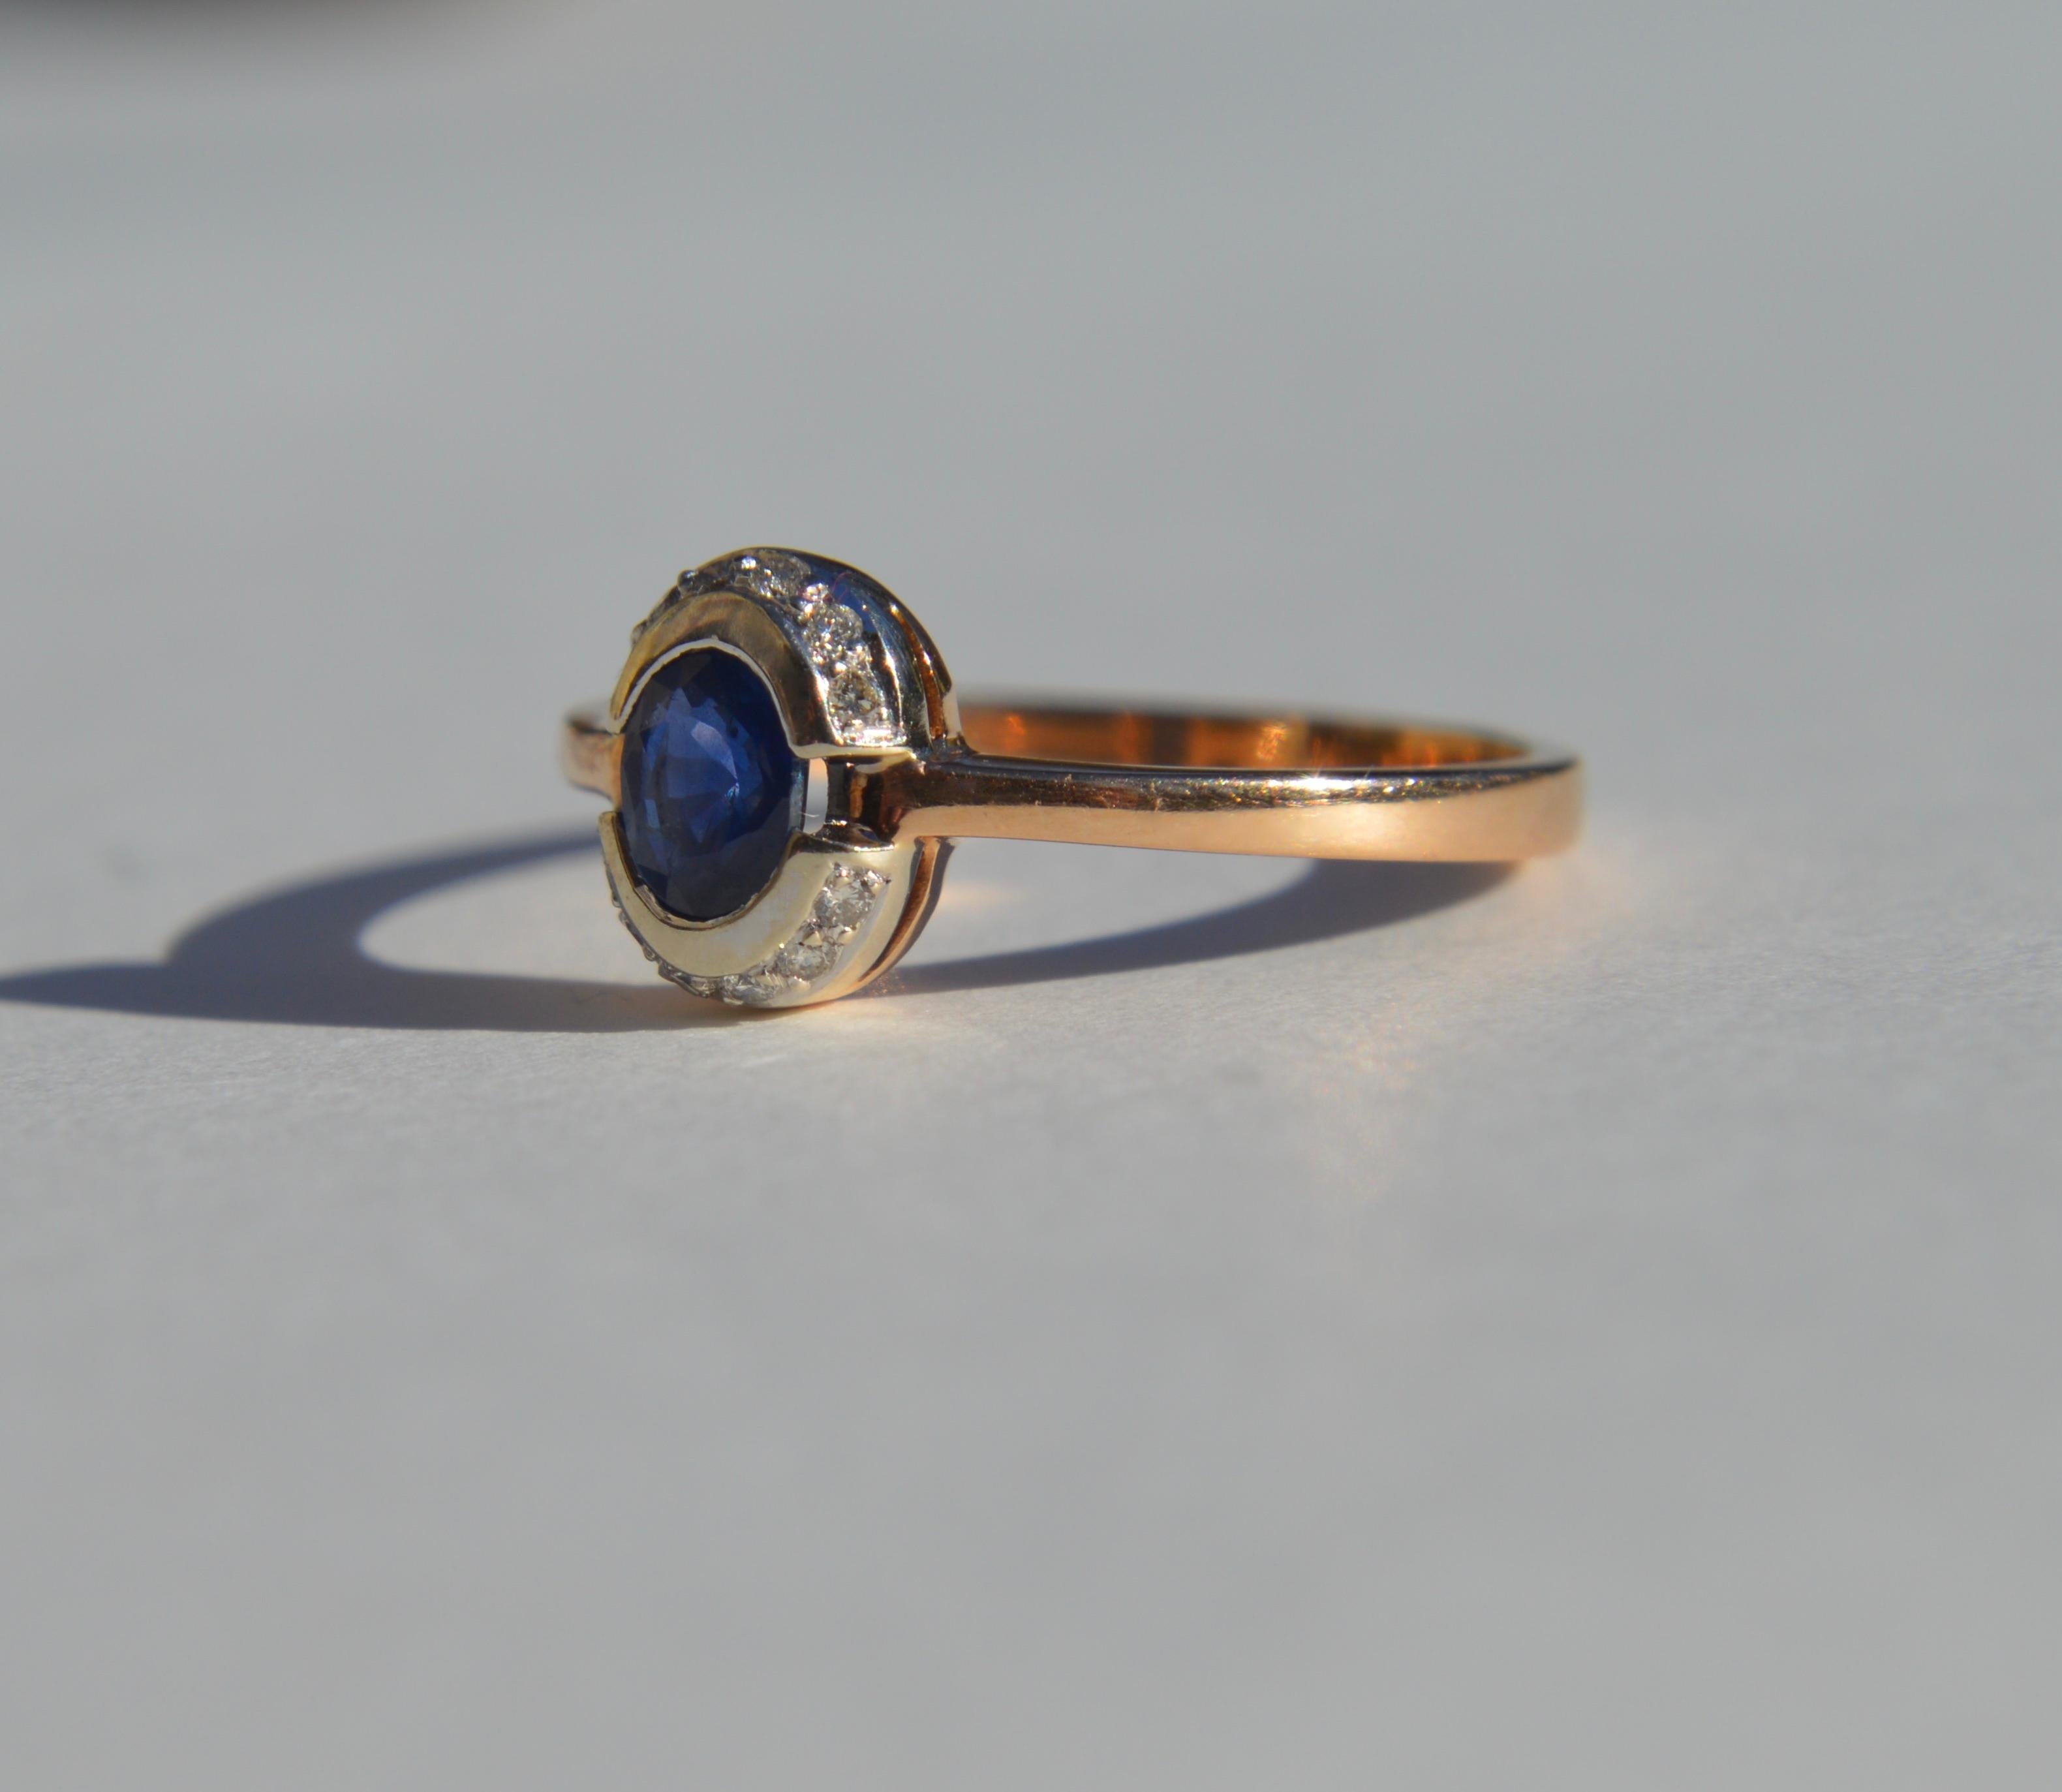 Gorgeous antique Art Deco era 1920s .35 carat natural unheated sapphire ring in 14K rose gold with a diamond halo consisting of 12 diamonds. Each clean, white, sparkling single cut diamond measures 1mm (.005 carat). The natural sapphire is a lovely